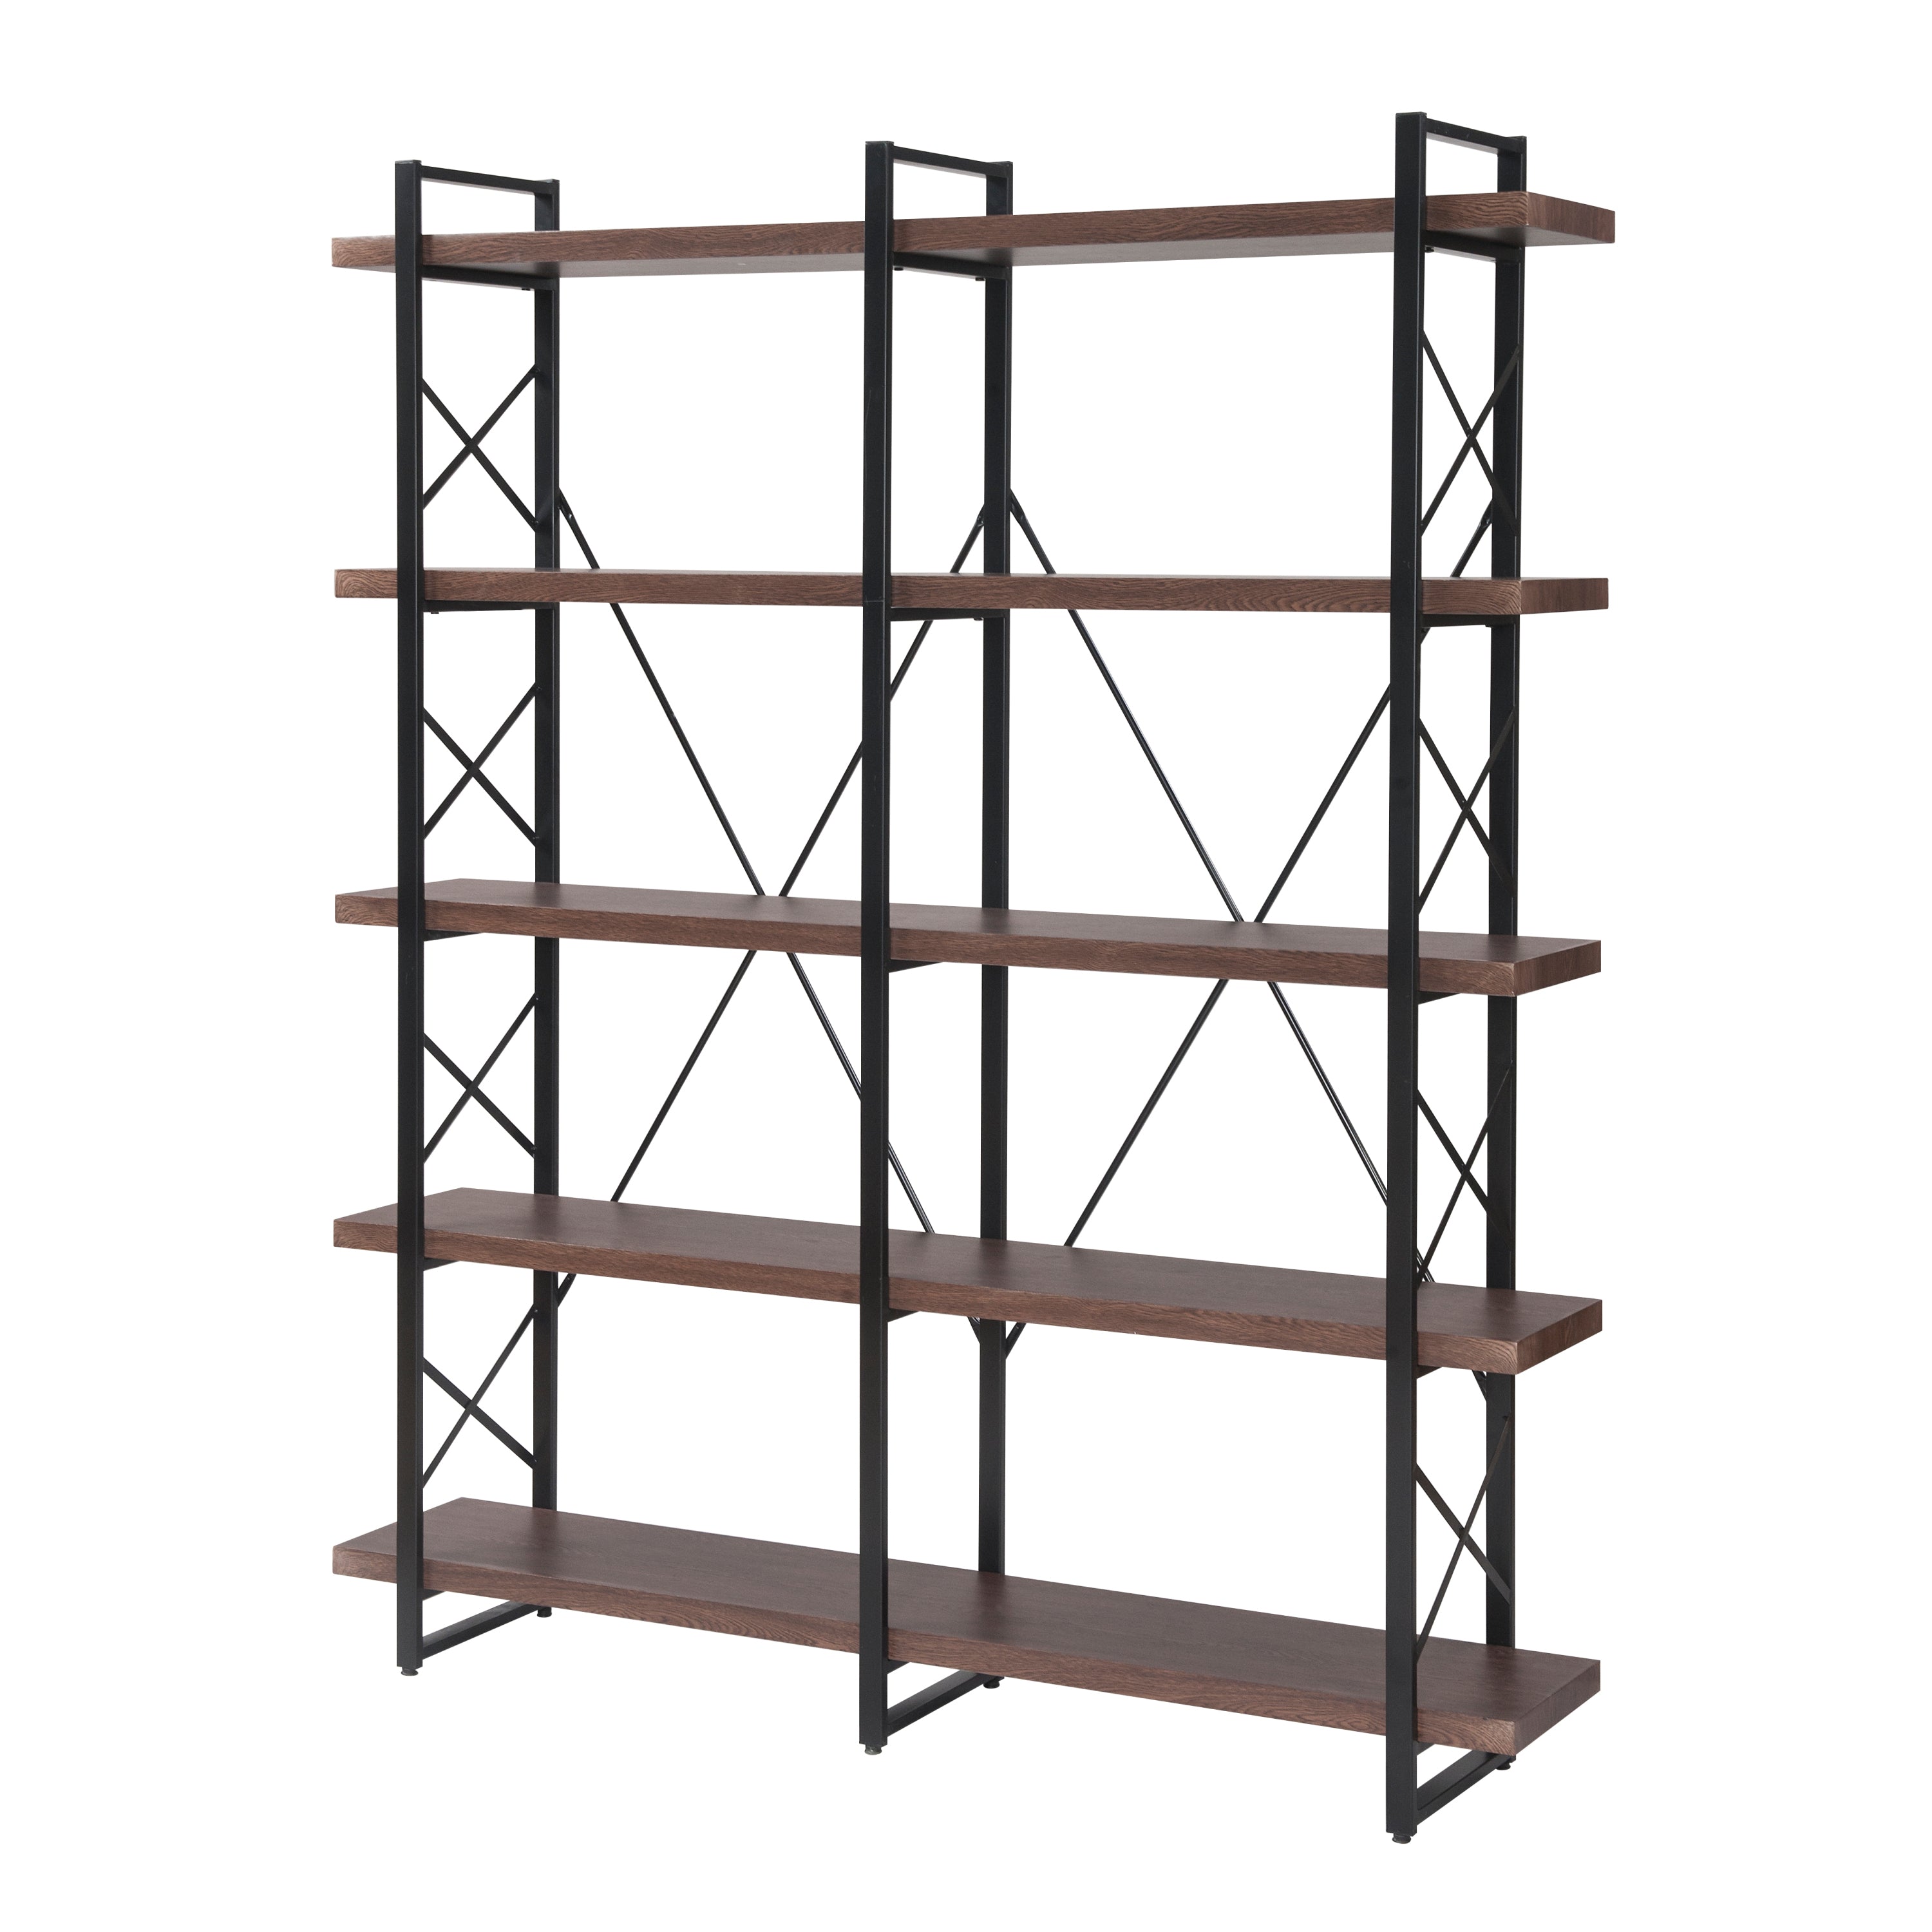 X Design Etageres Office Industrial Bookcase